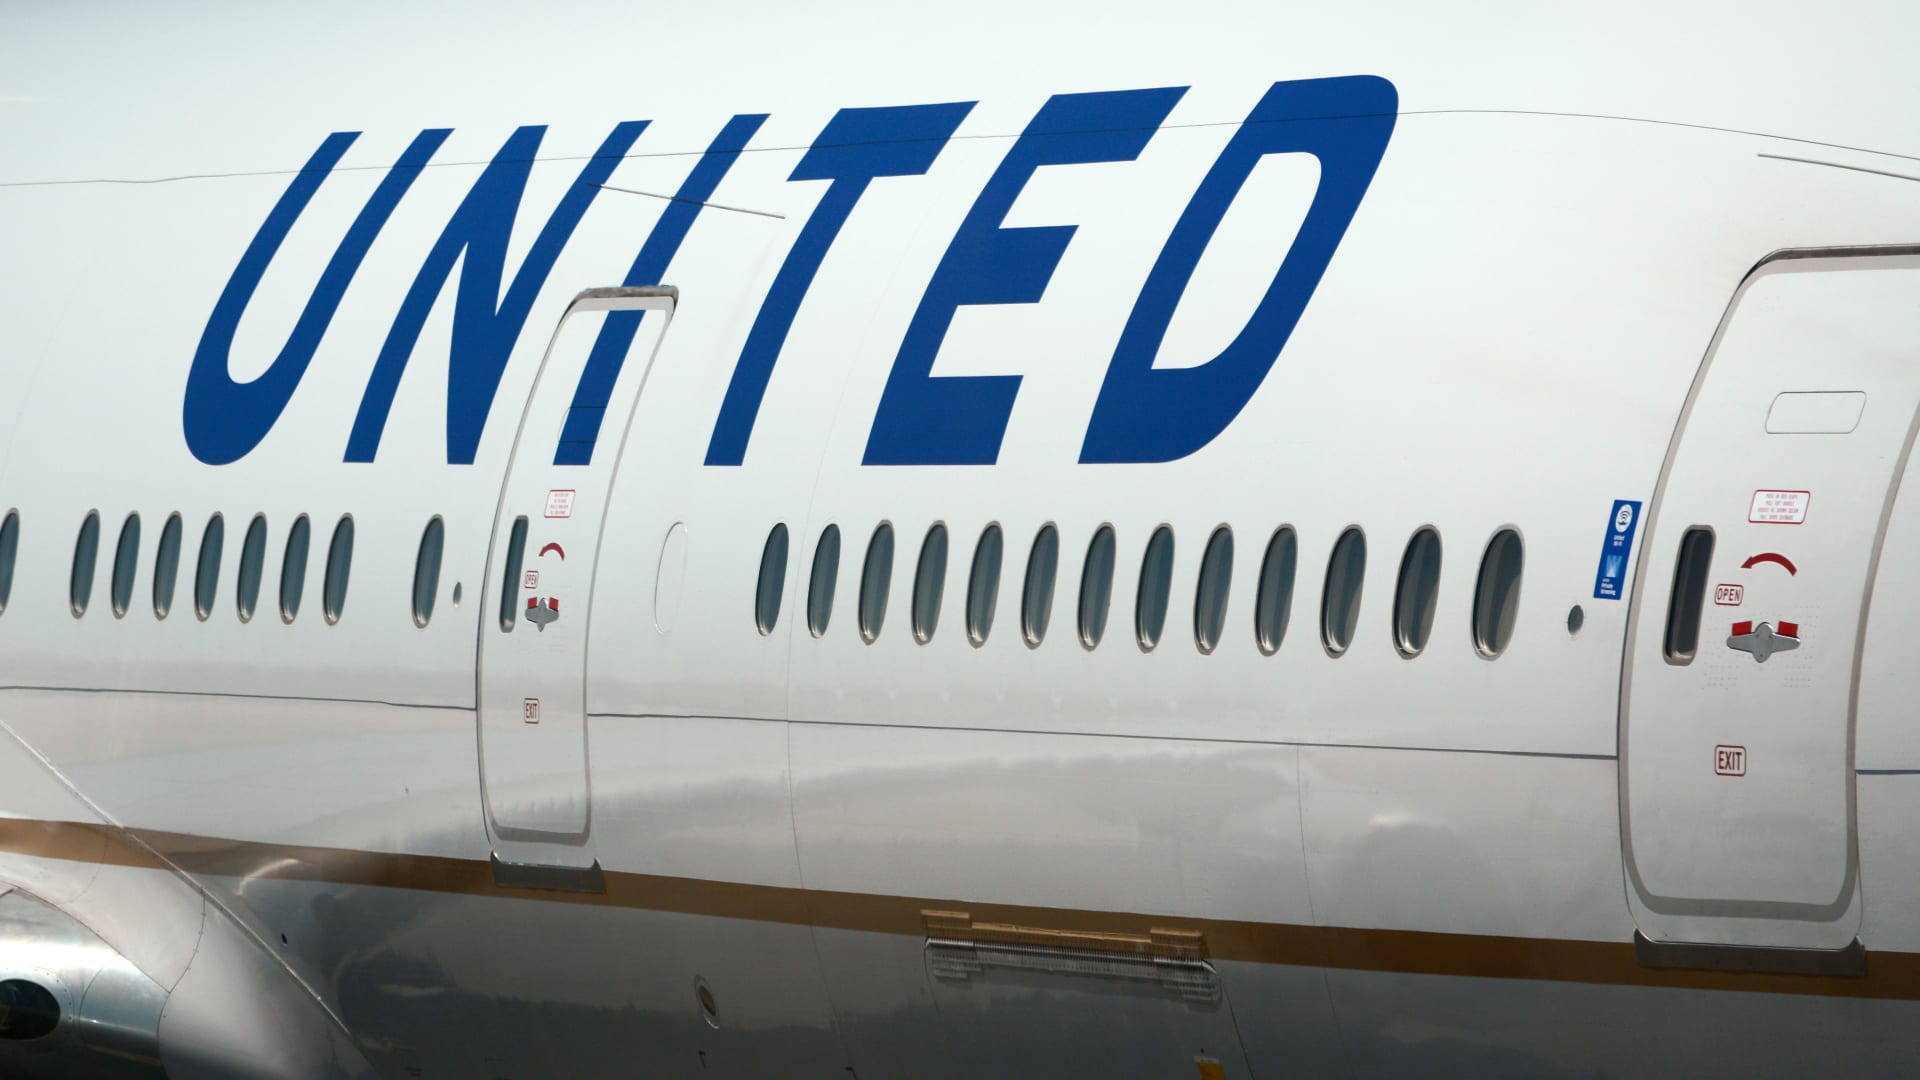 A Court Says United Airline's Unpaid Leave Policy for Religious Objectors Does 'Irreparable Harm'